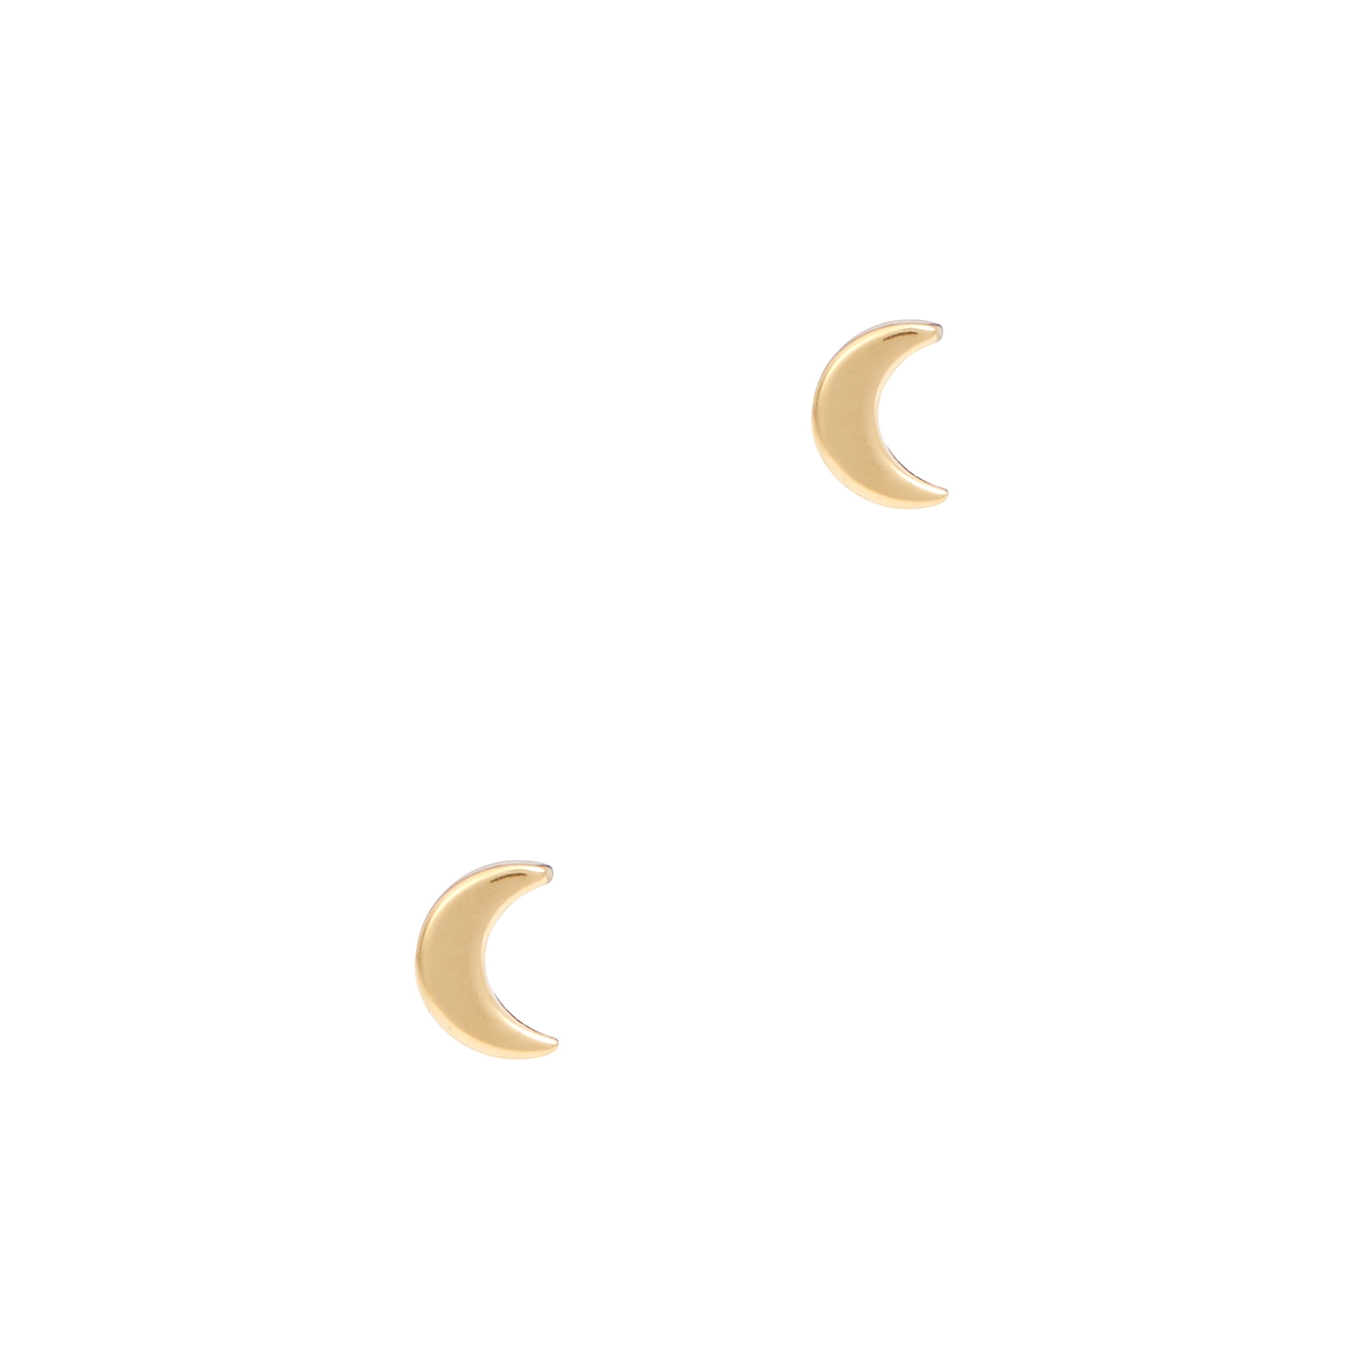 Daisy London Crescent Moon 18kt Gold-plated Stud Earrings